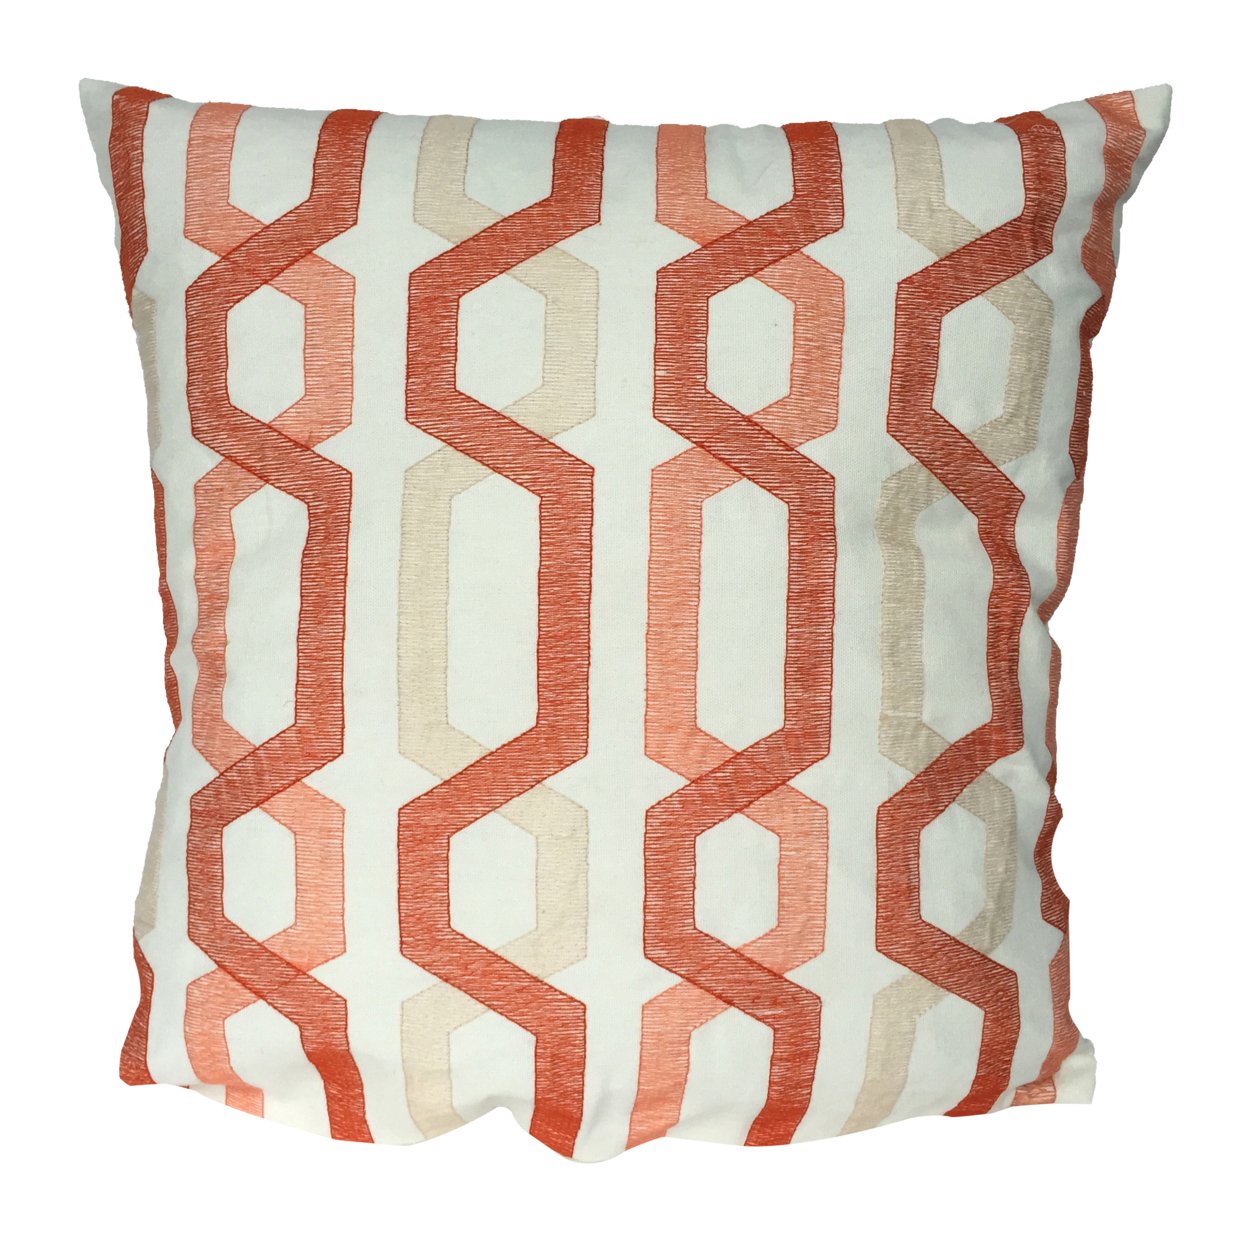 Contemporary Cotton Pillow With Geometric Embroidery, Red And Cream- Saltoro Sherpi